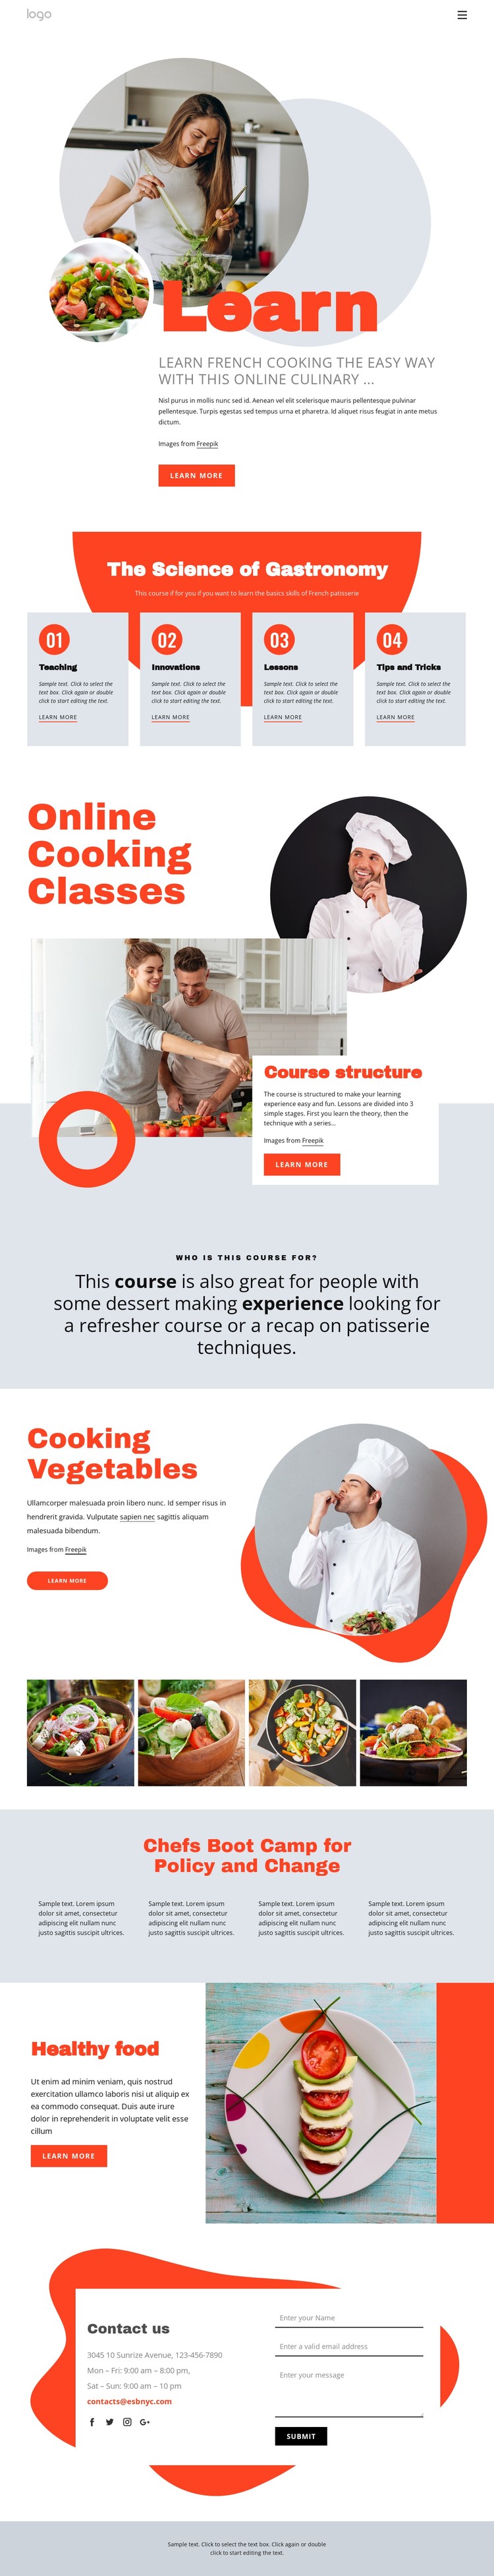 Learn cooking the easy way CSS Template